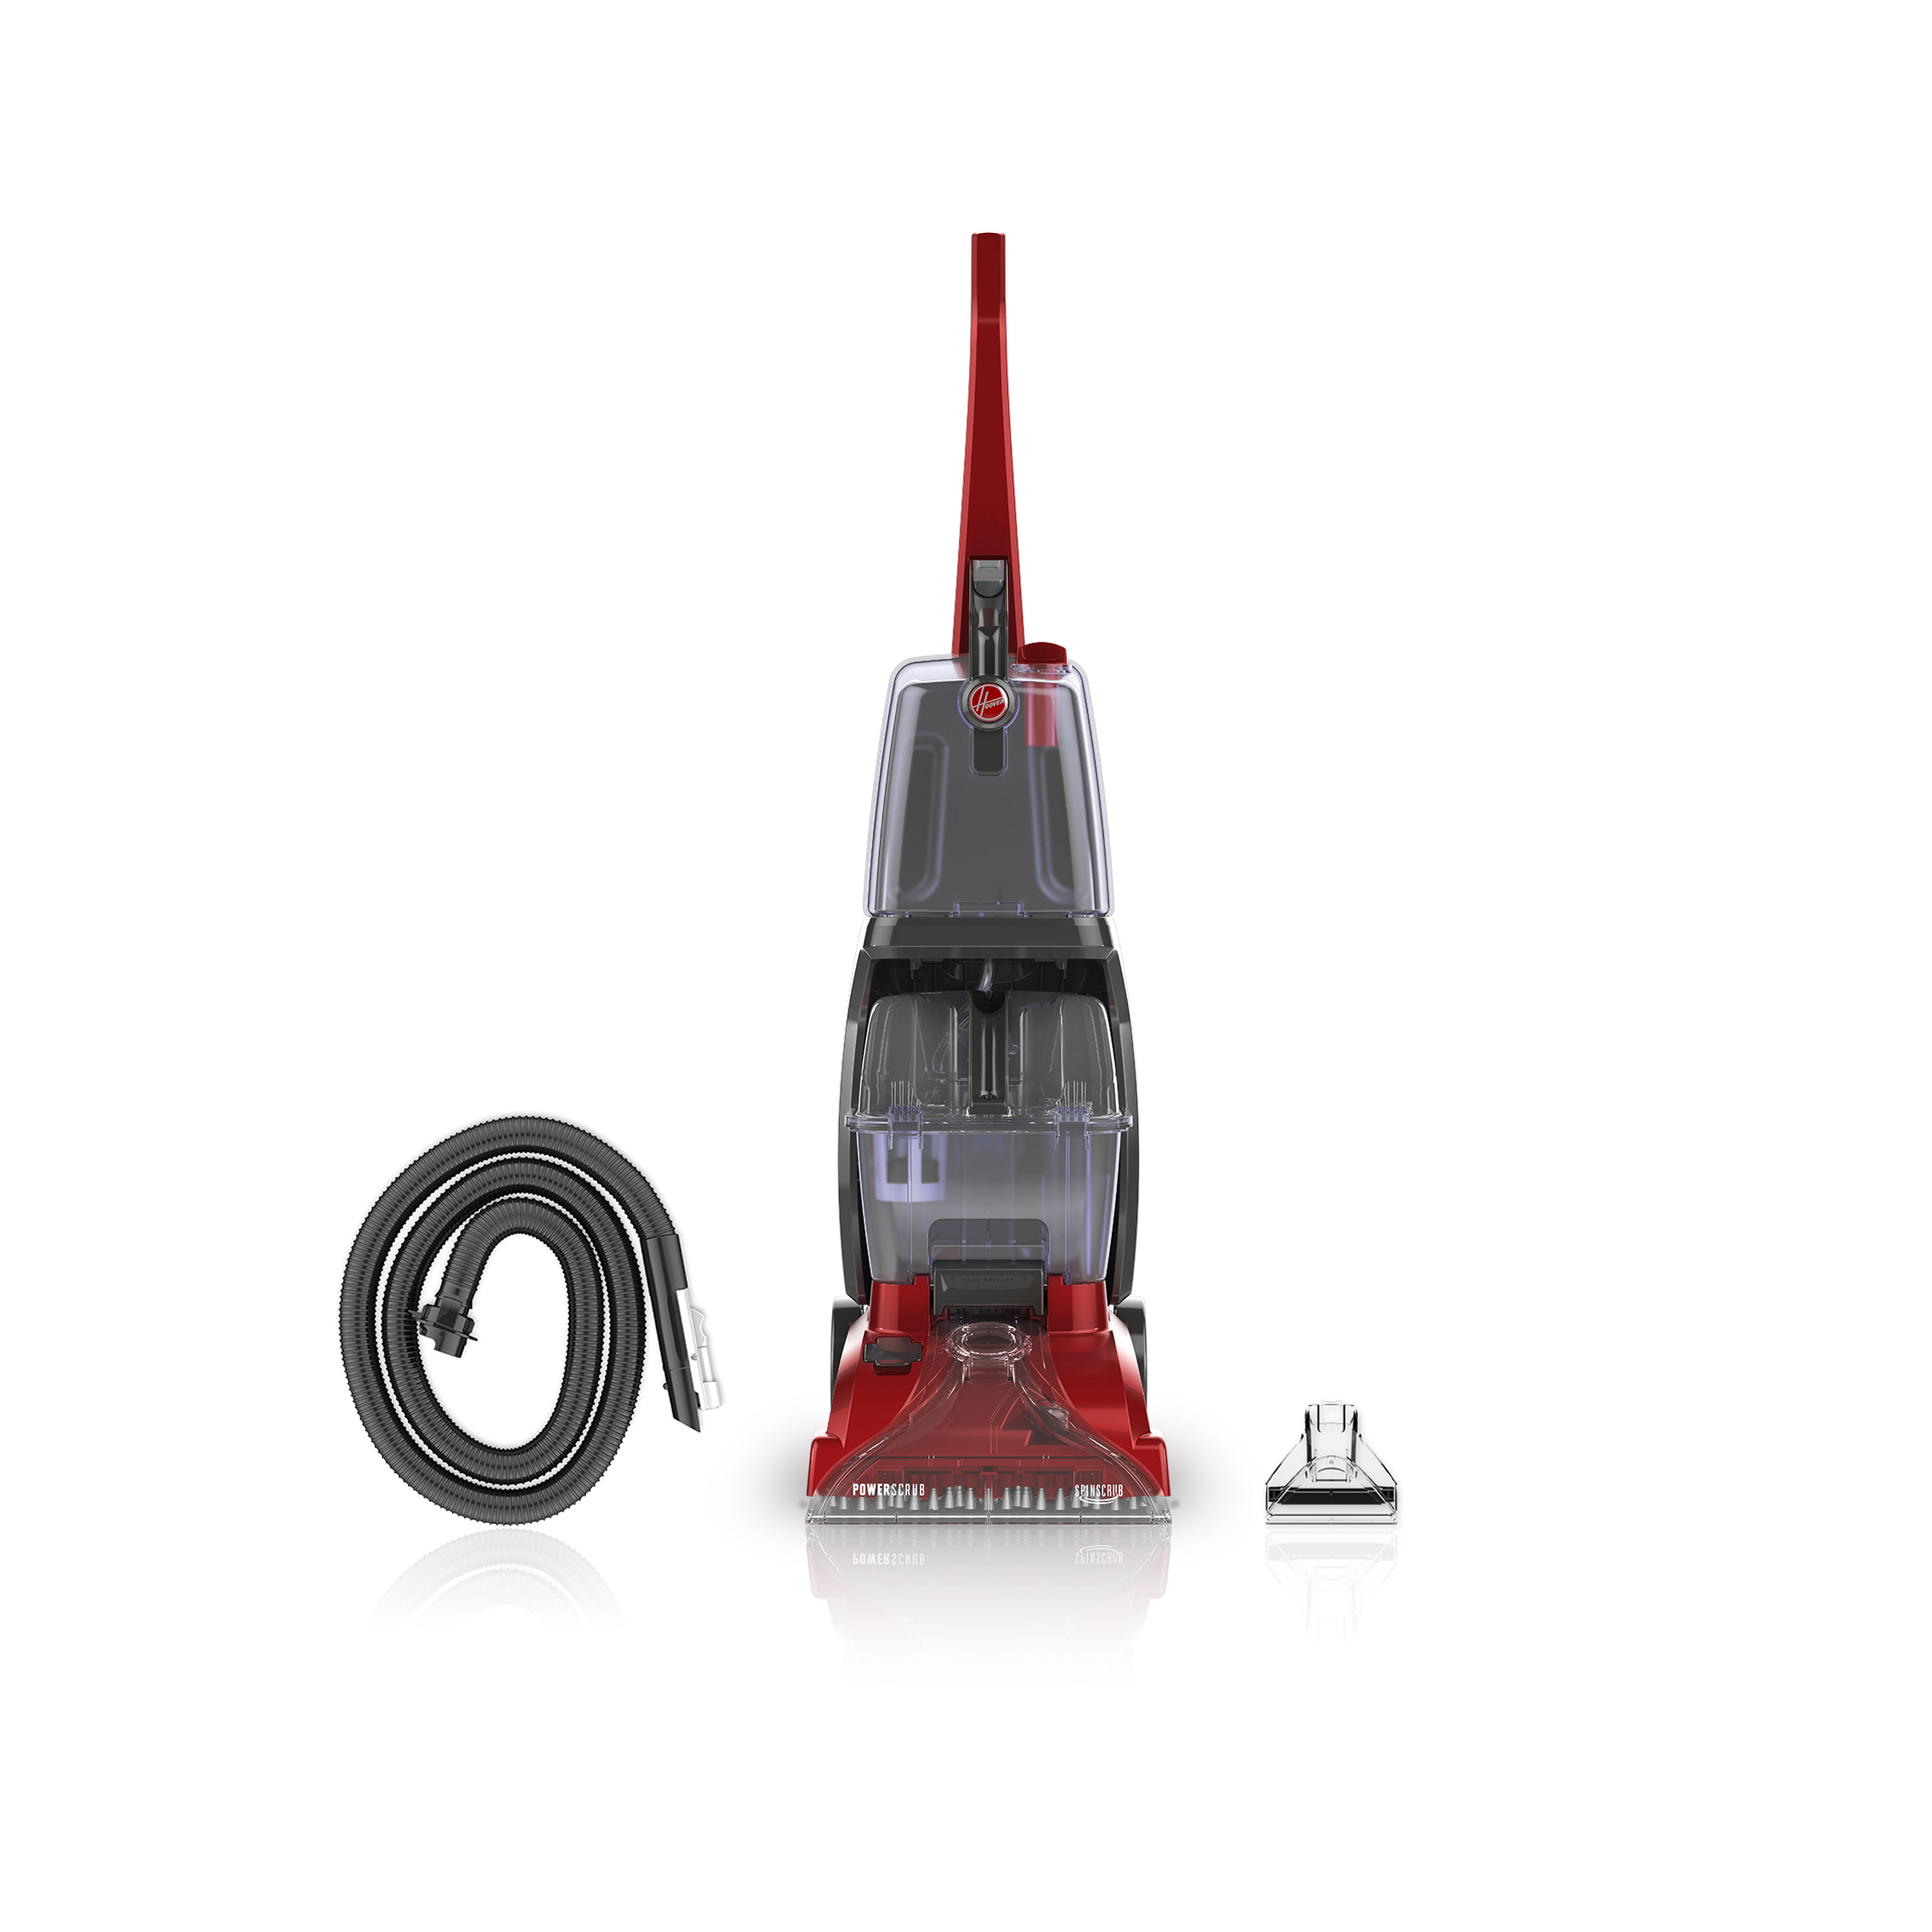 Hoover PowerScrub Carpet Cleaner with SpinScrub Technology, FH50135 - image 3 of 14